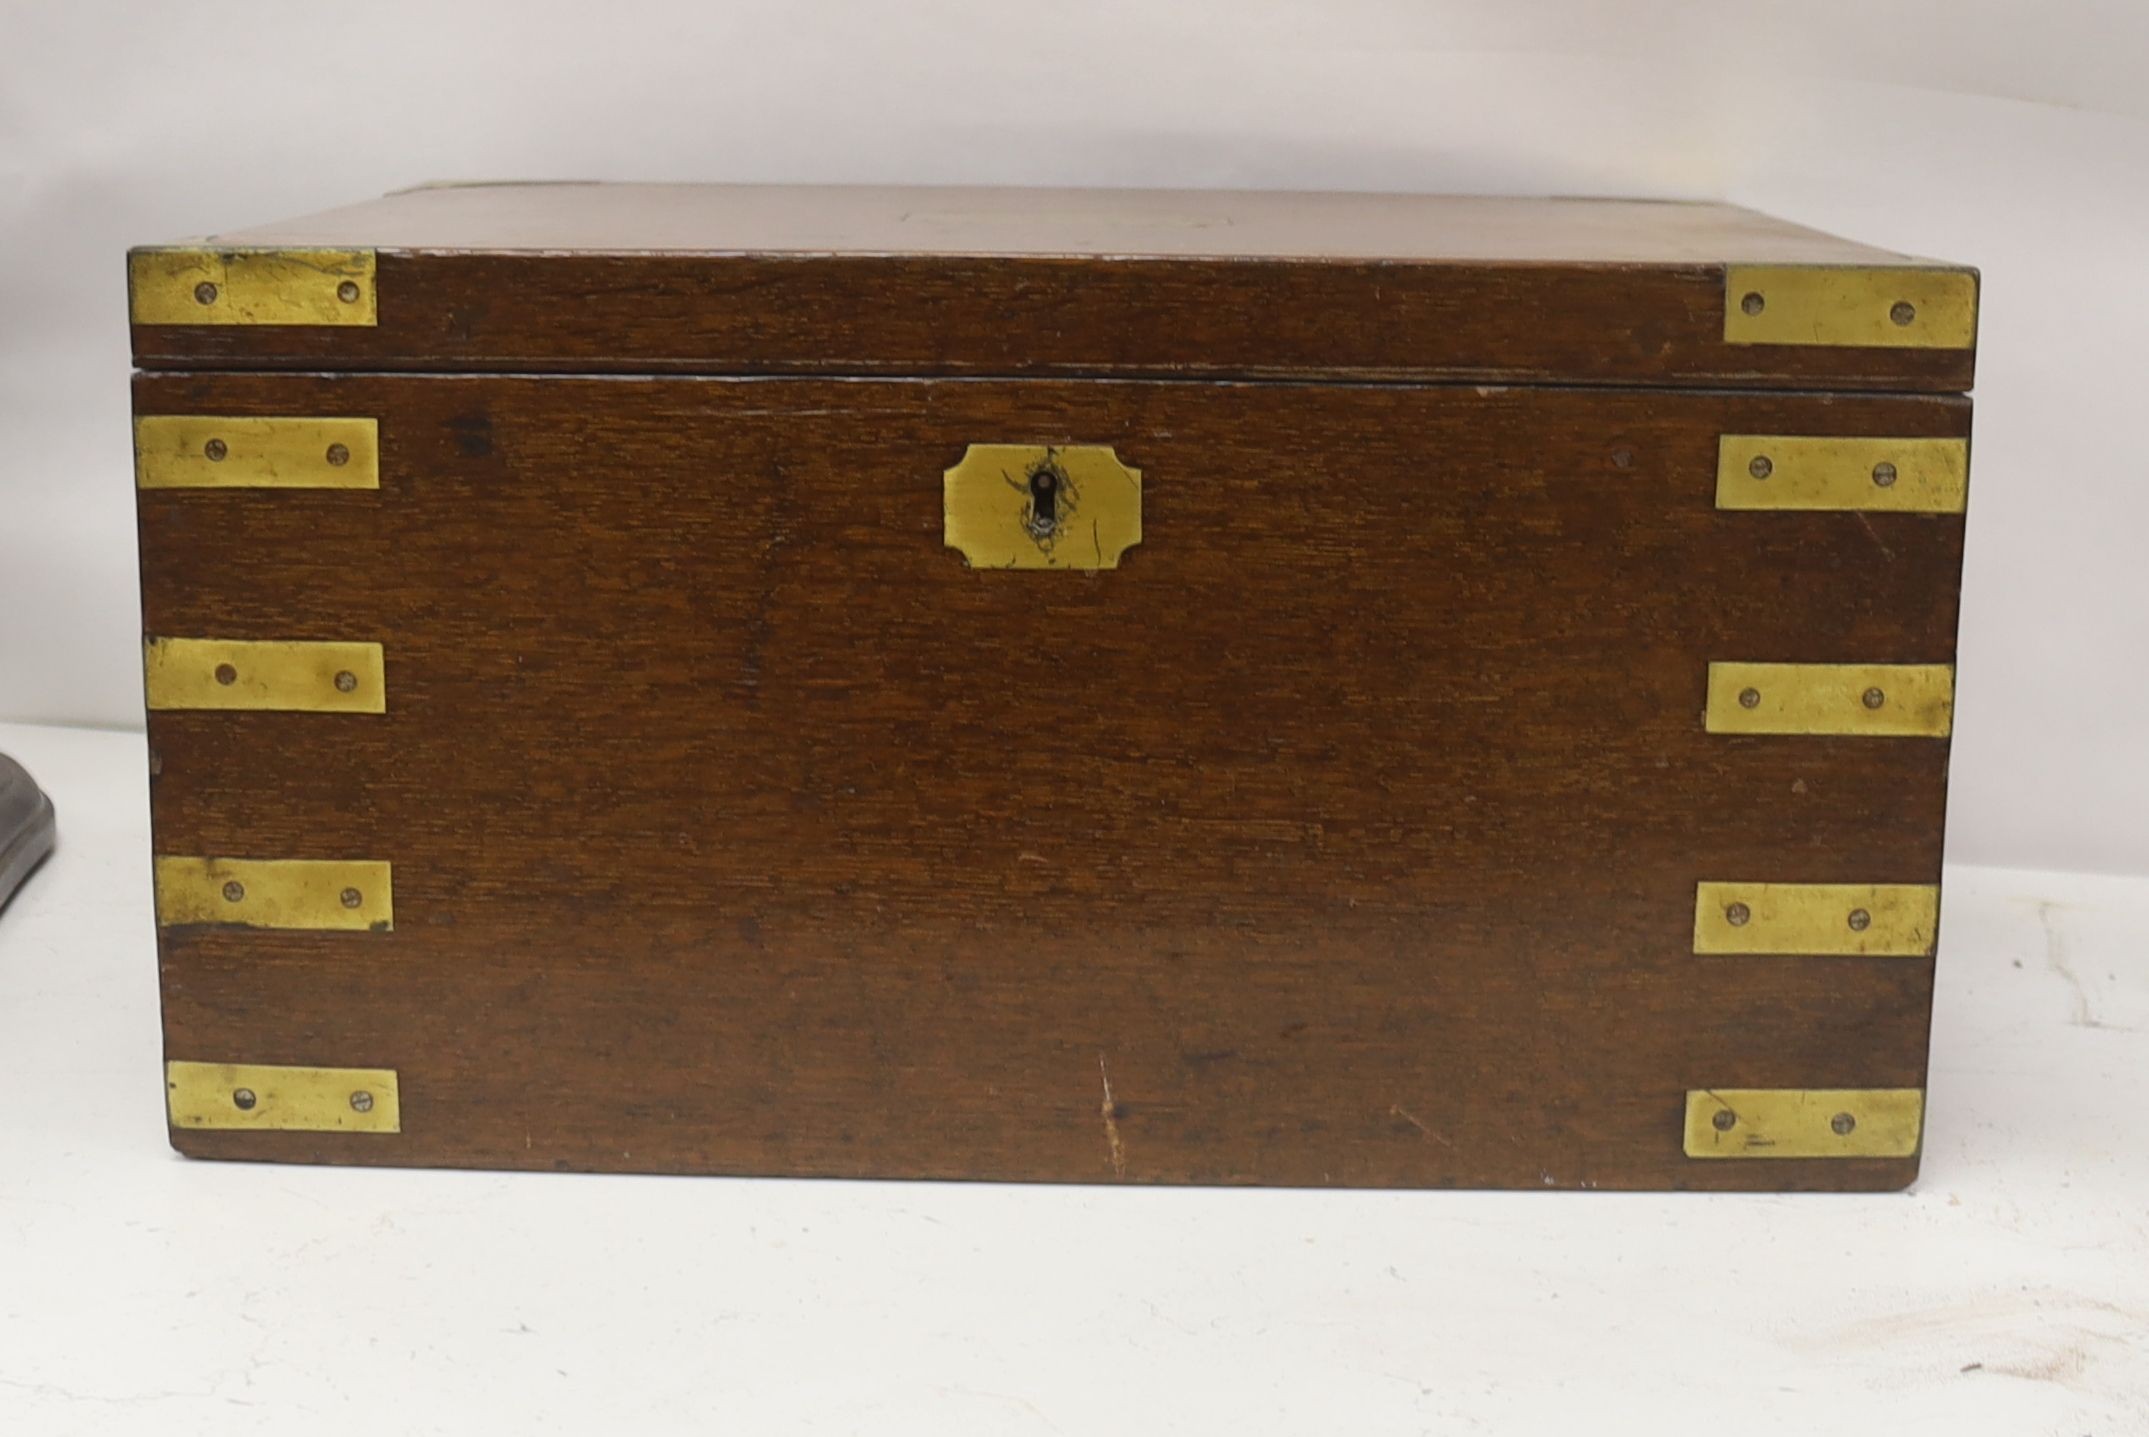 A brass bound military style canteen box - no contents 44cm